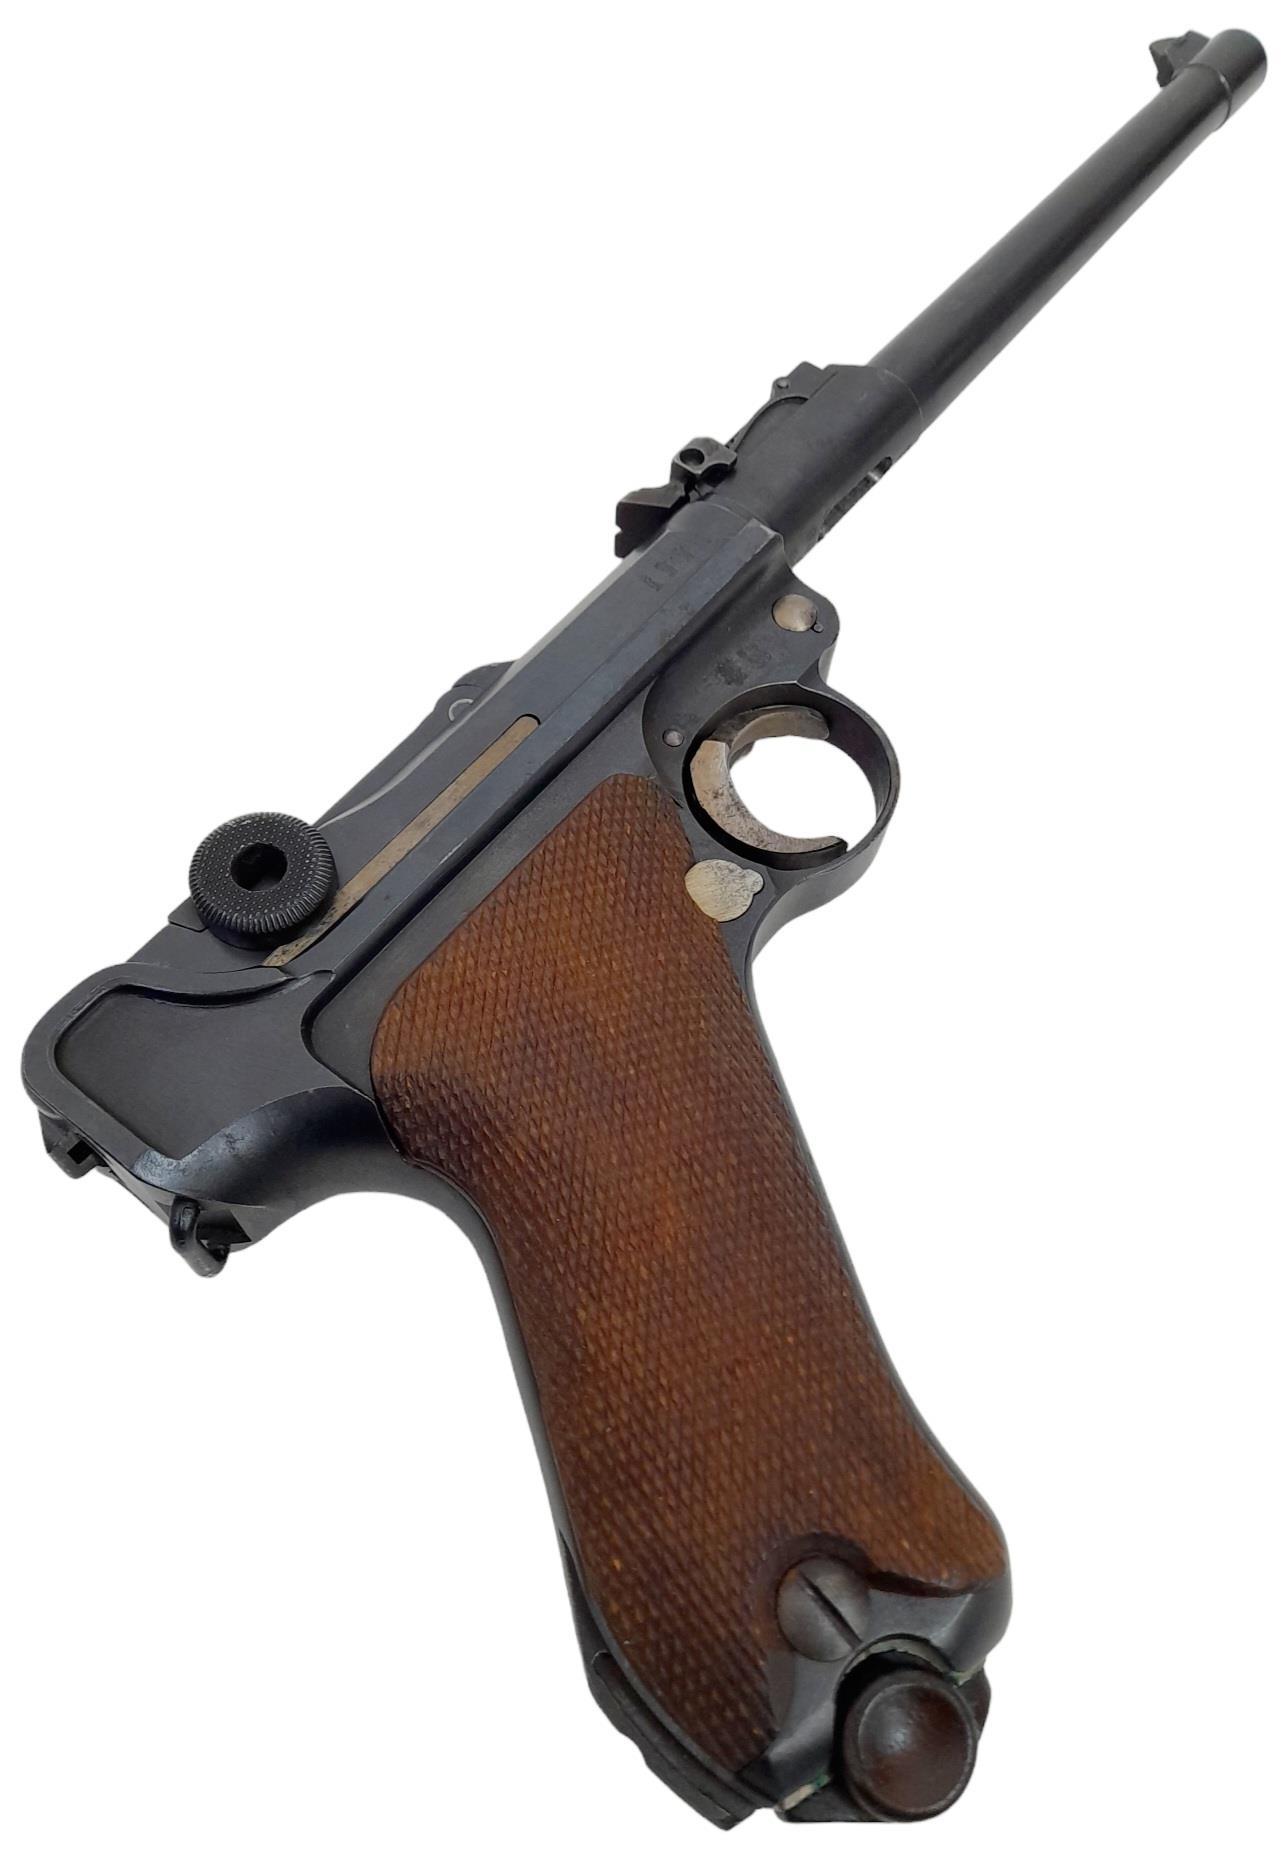 A Deactivated Antique 1917 German Luger Pistol. Matching serial numbers. This 9mm classic pistol - Image 2 of 6